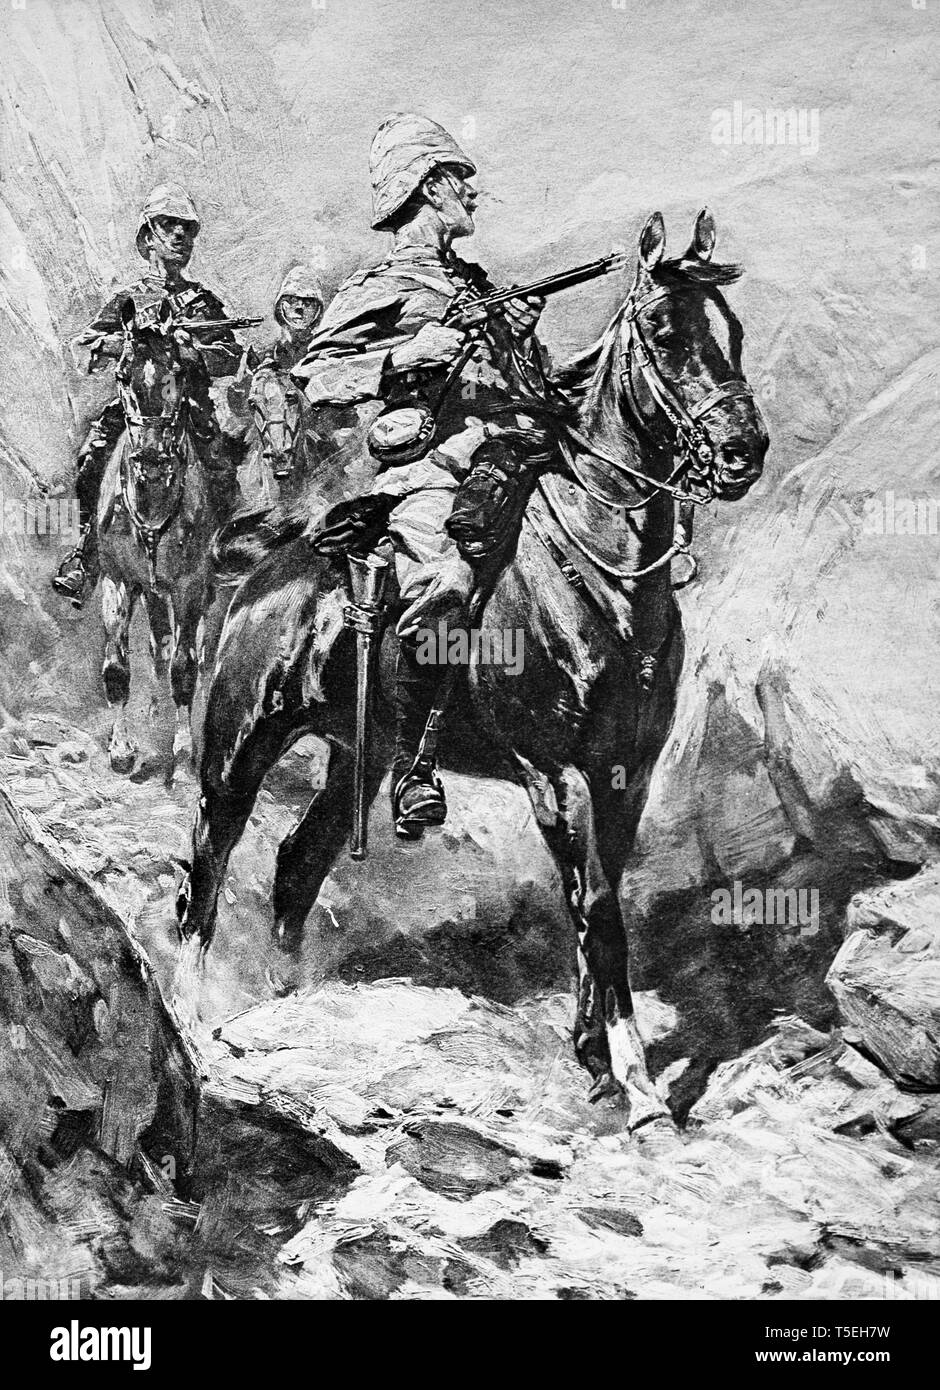 Illustration from the Illustrated London News in 1900, showing British Cavalry Soldiers during the Boer war in Southern Africa. Stock Photo